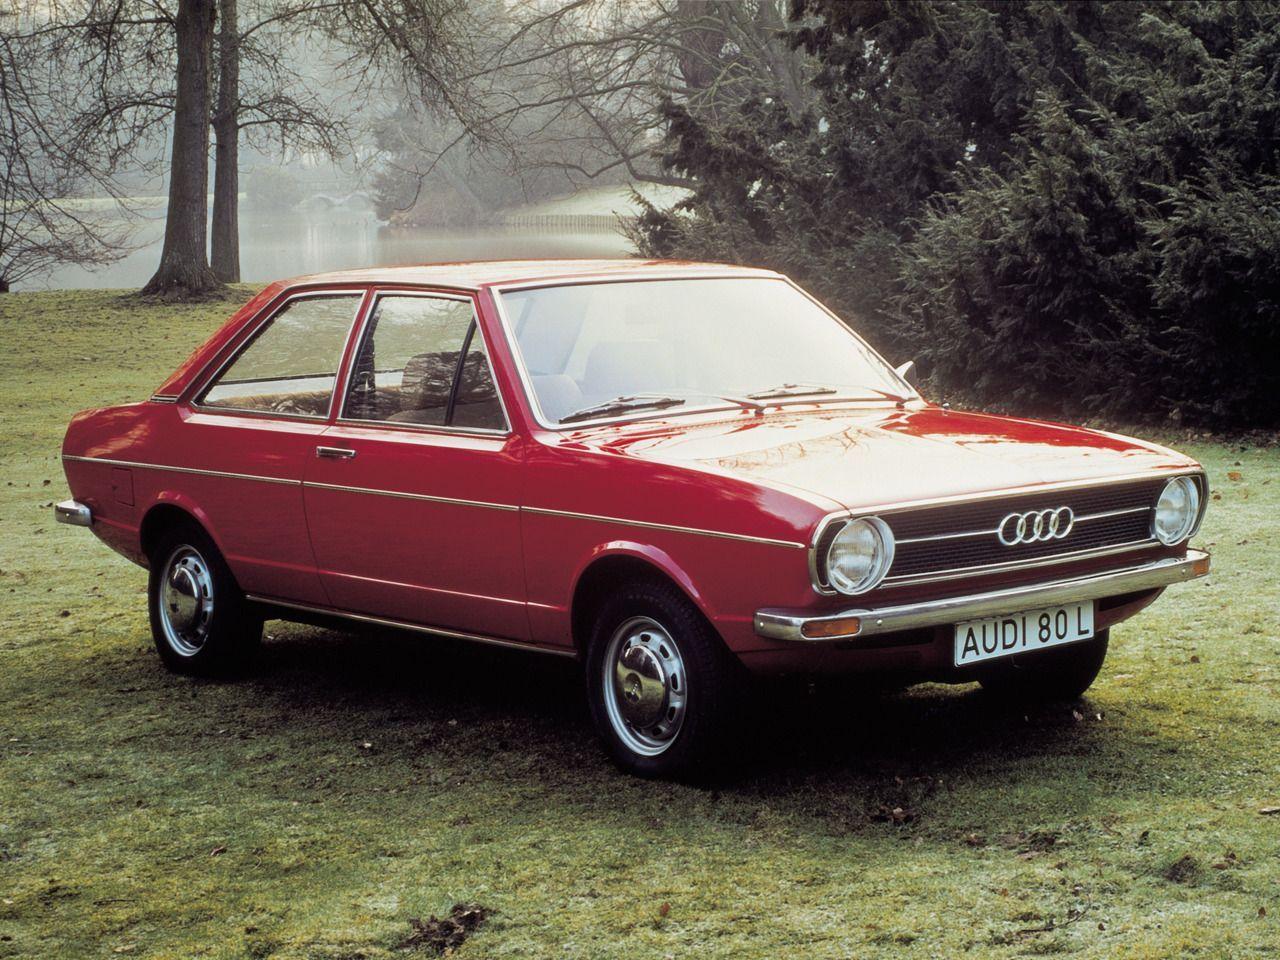 Audi 80.my first front wheel drive car.it was in a poo brown